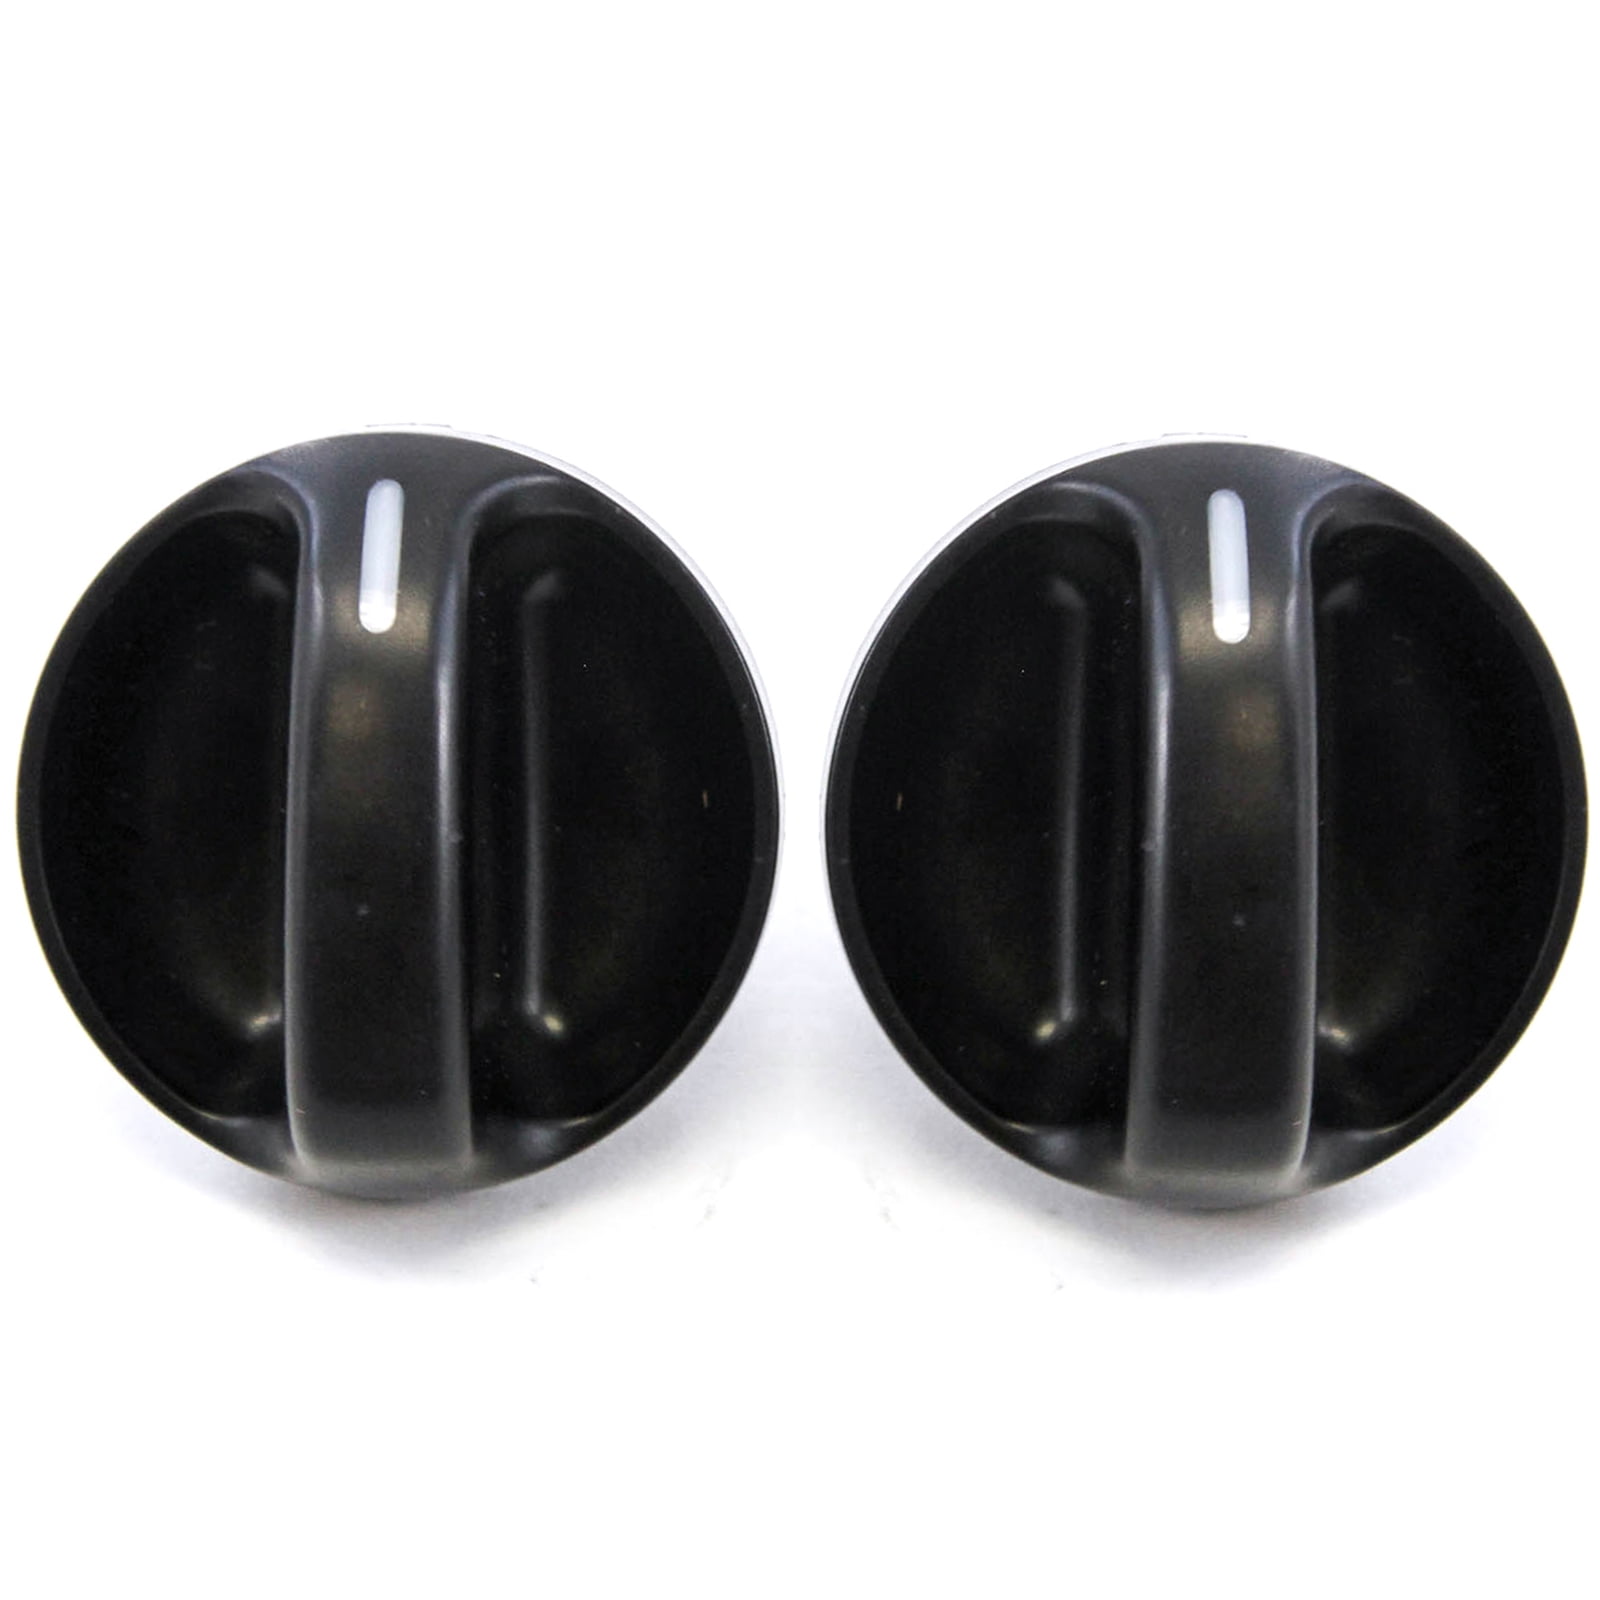 2 Compatible with Toyota Tundra 2000-2006 Control Knobs Heater AC or